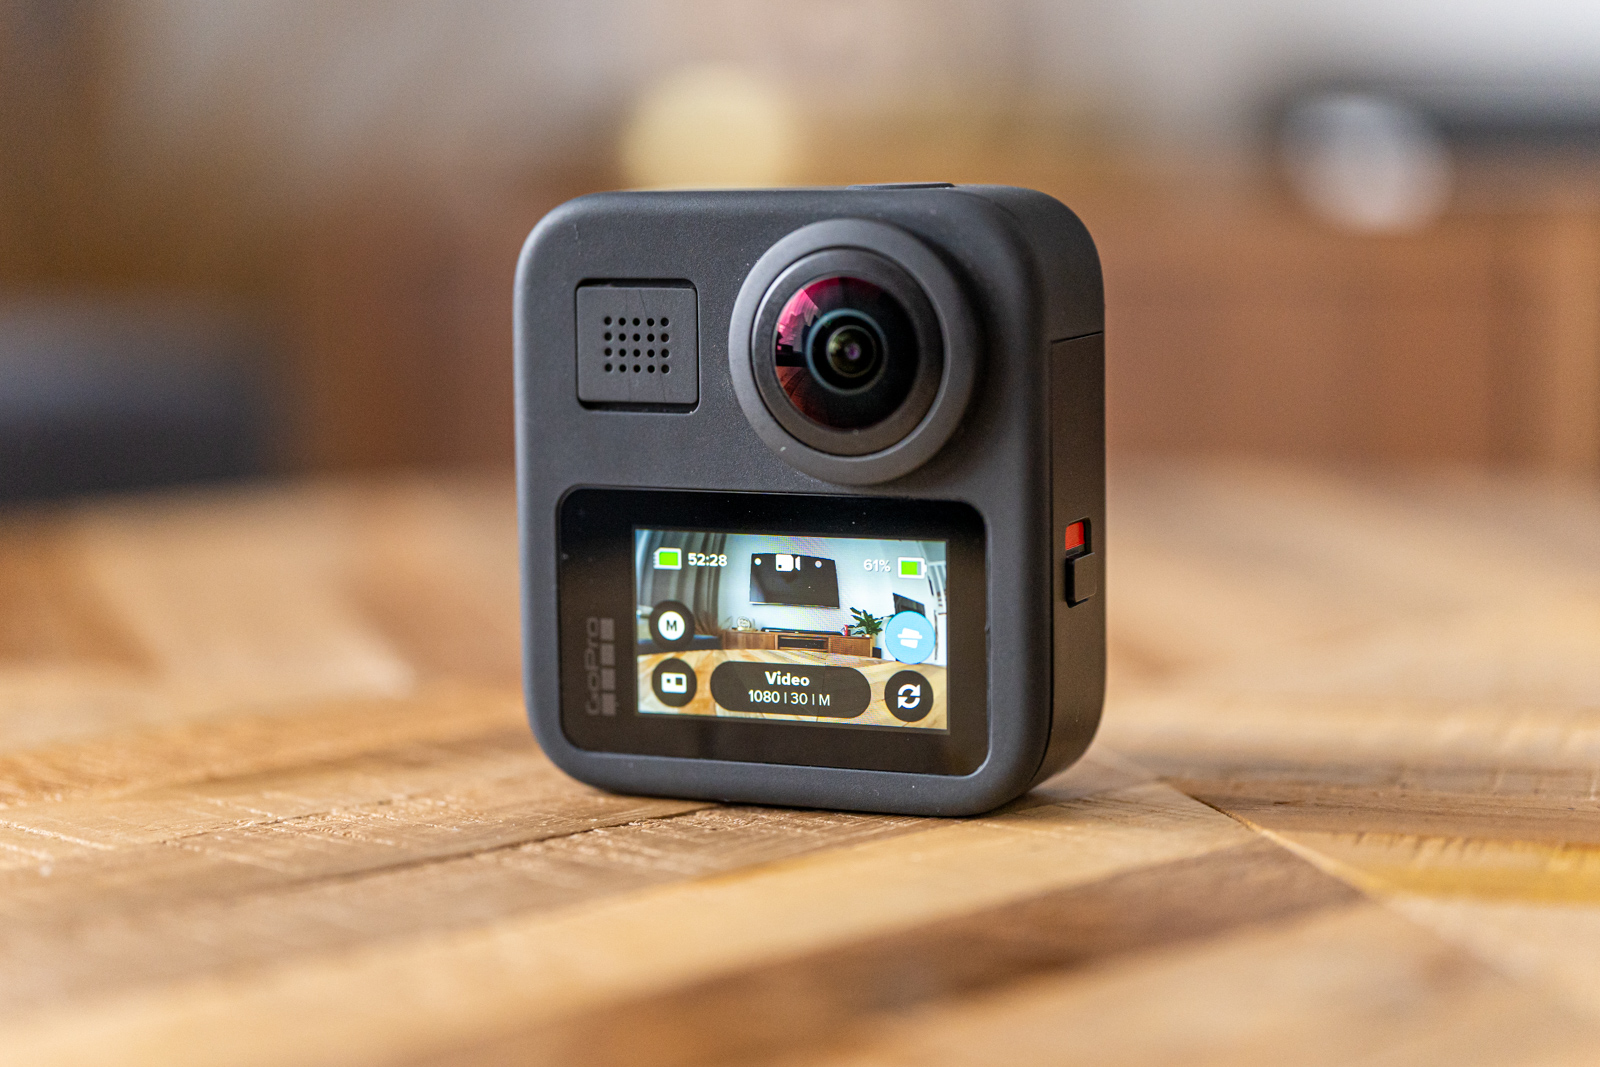 If you are going to buy GoPro. seriously consider buying